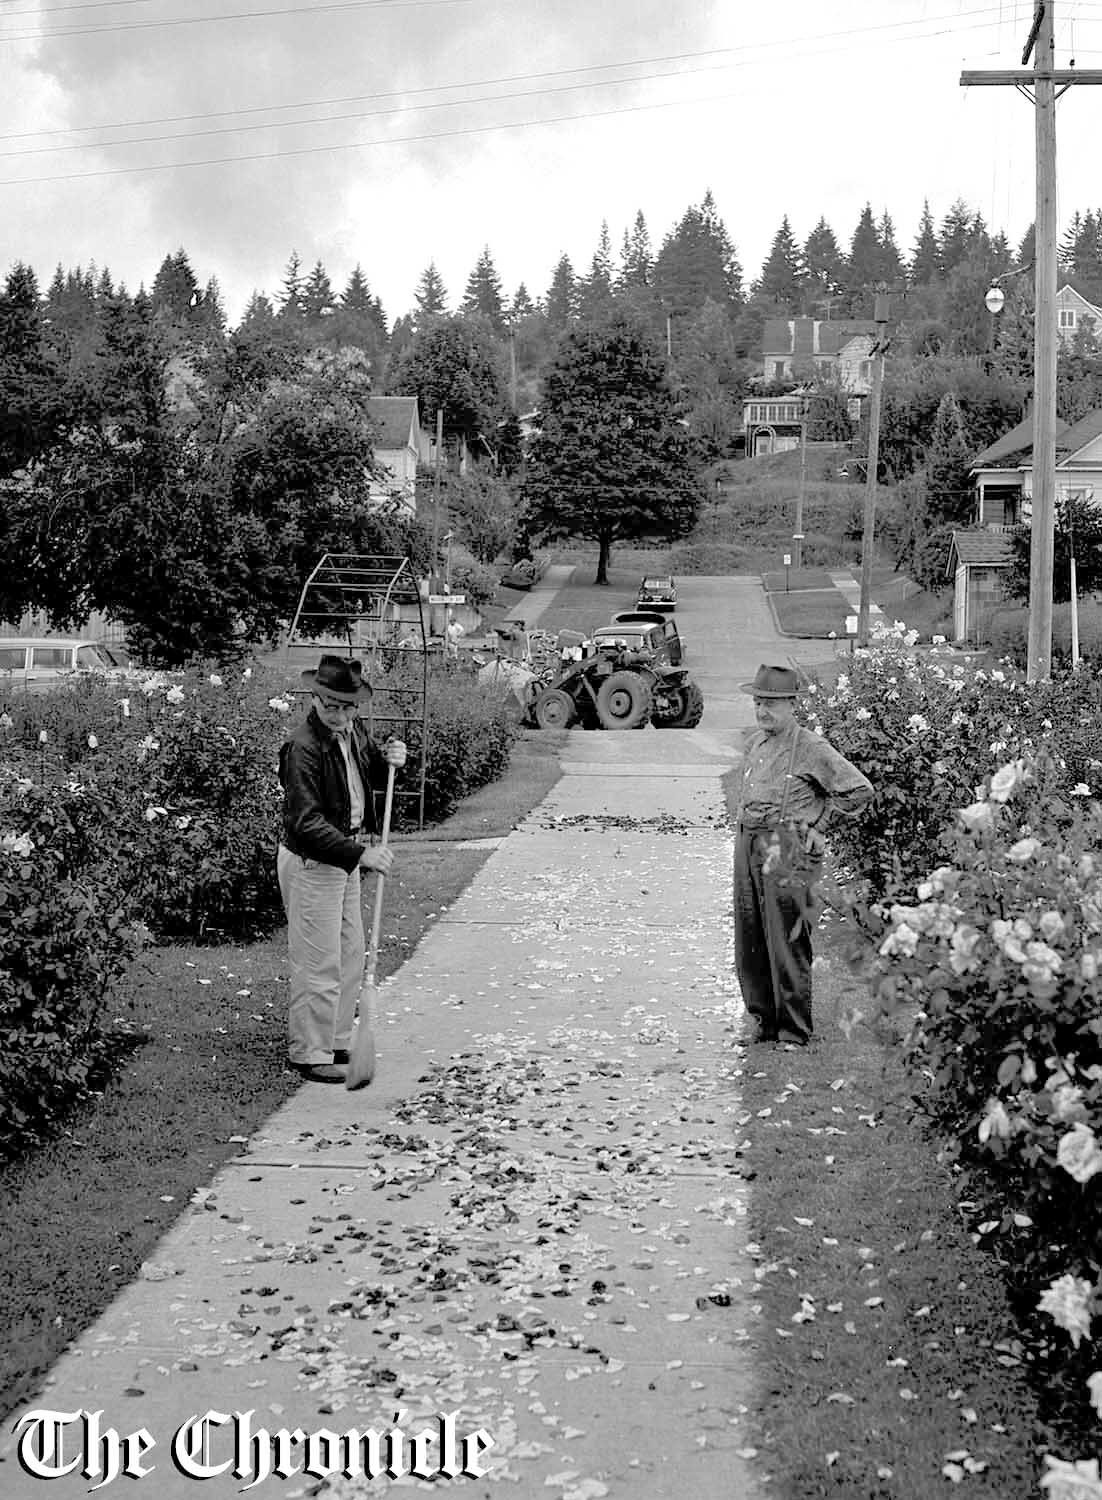 From the June 1959 Chronicle archives:  “ROSE DAMAGED - Someone, apparently youngsters, wreaked havoc in Chehalis civic center rose garden Tuesday night. They took hundreds of blooms and buds and strewed the walk with them. Many of the bushes will not bloom again this year. Above, Henry Glanze, at left, garden caretaker, sweeps up mess while Mayor Walter B. Graham, Sr., looks on. - Chronicle Staff Photo.”